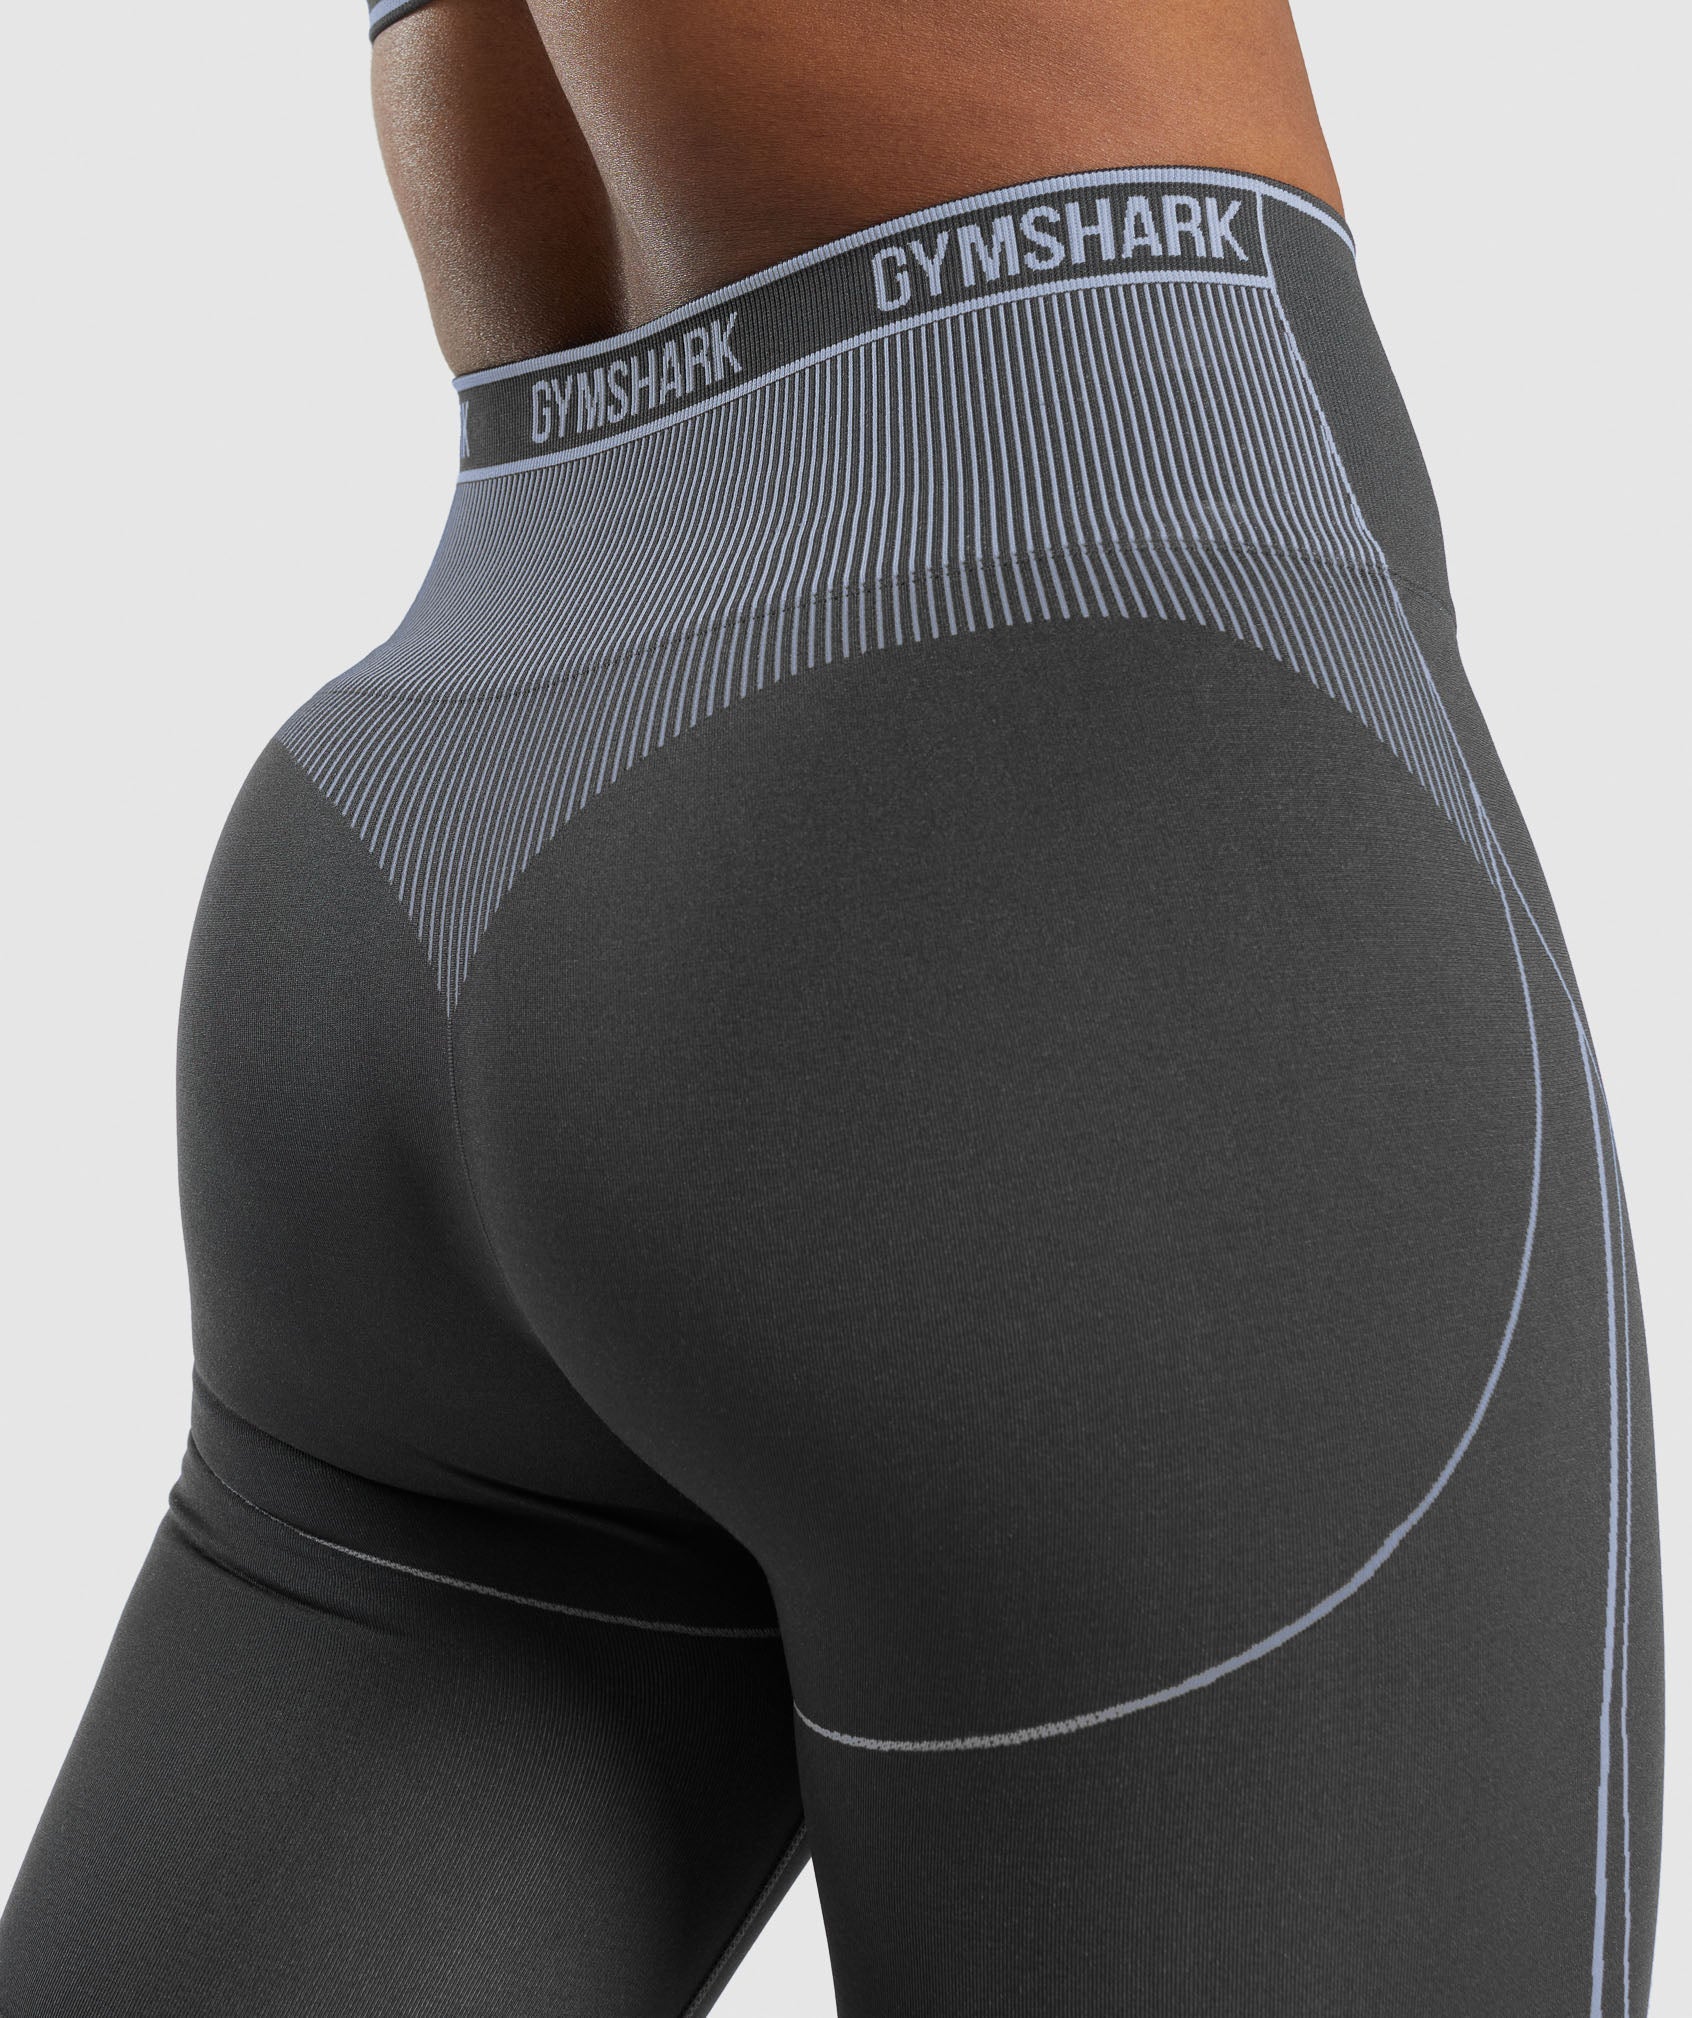 Apex Seamless High Rise Short in Onyx Grey/Lavender Blue - view 5